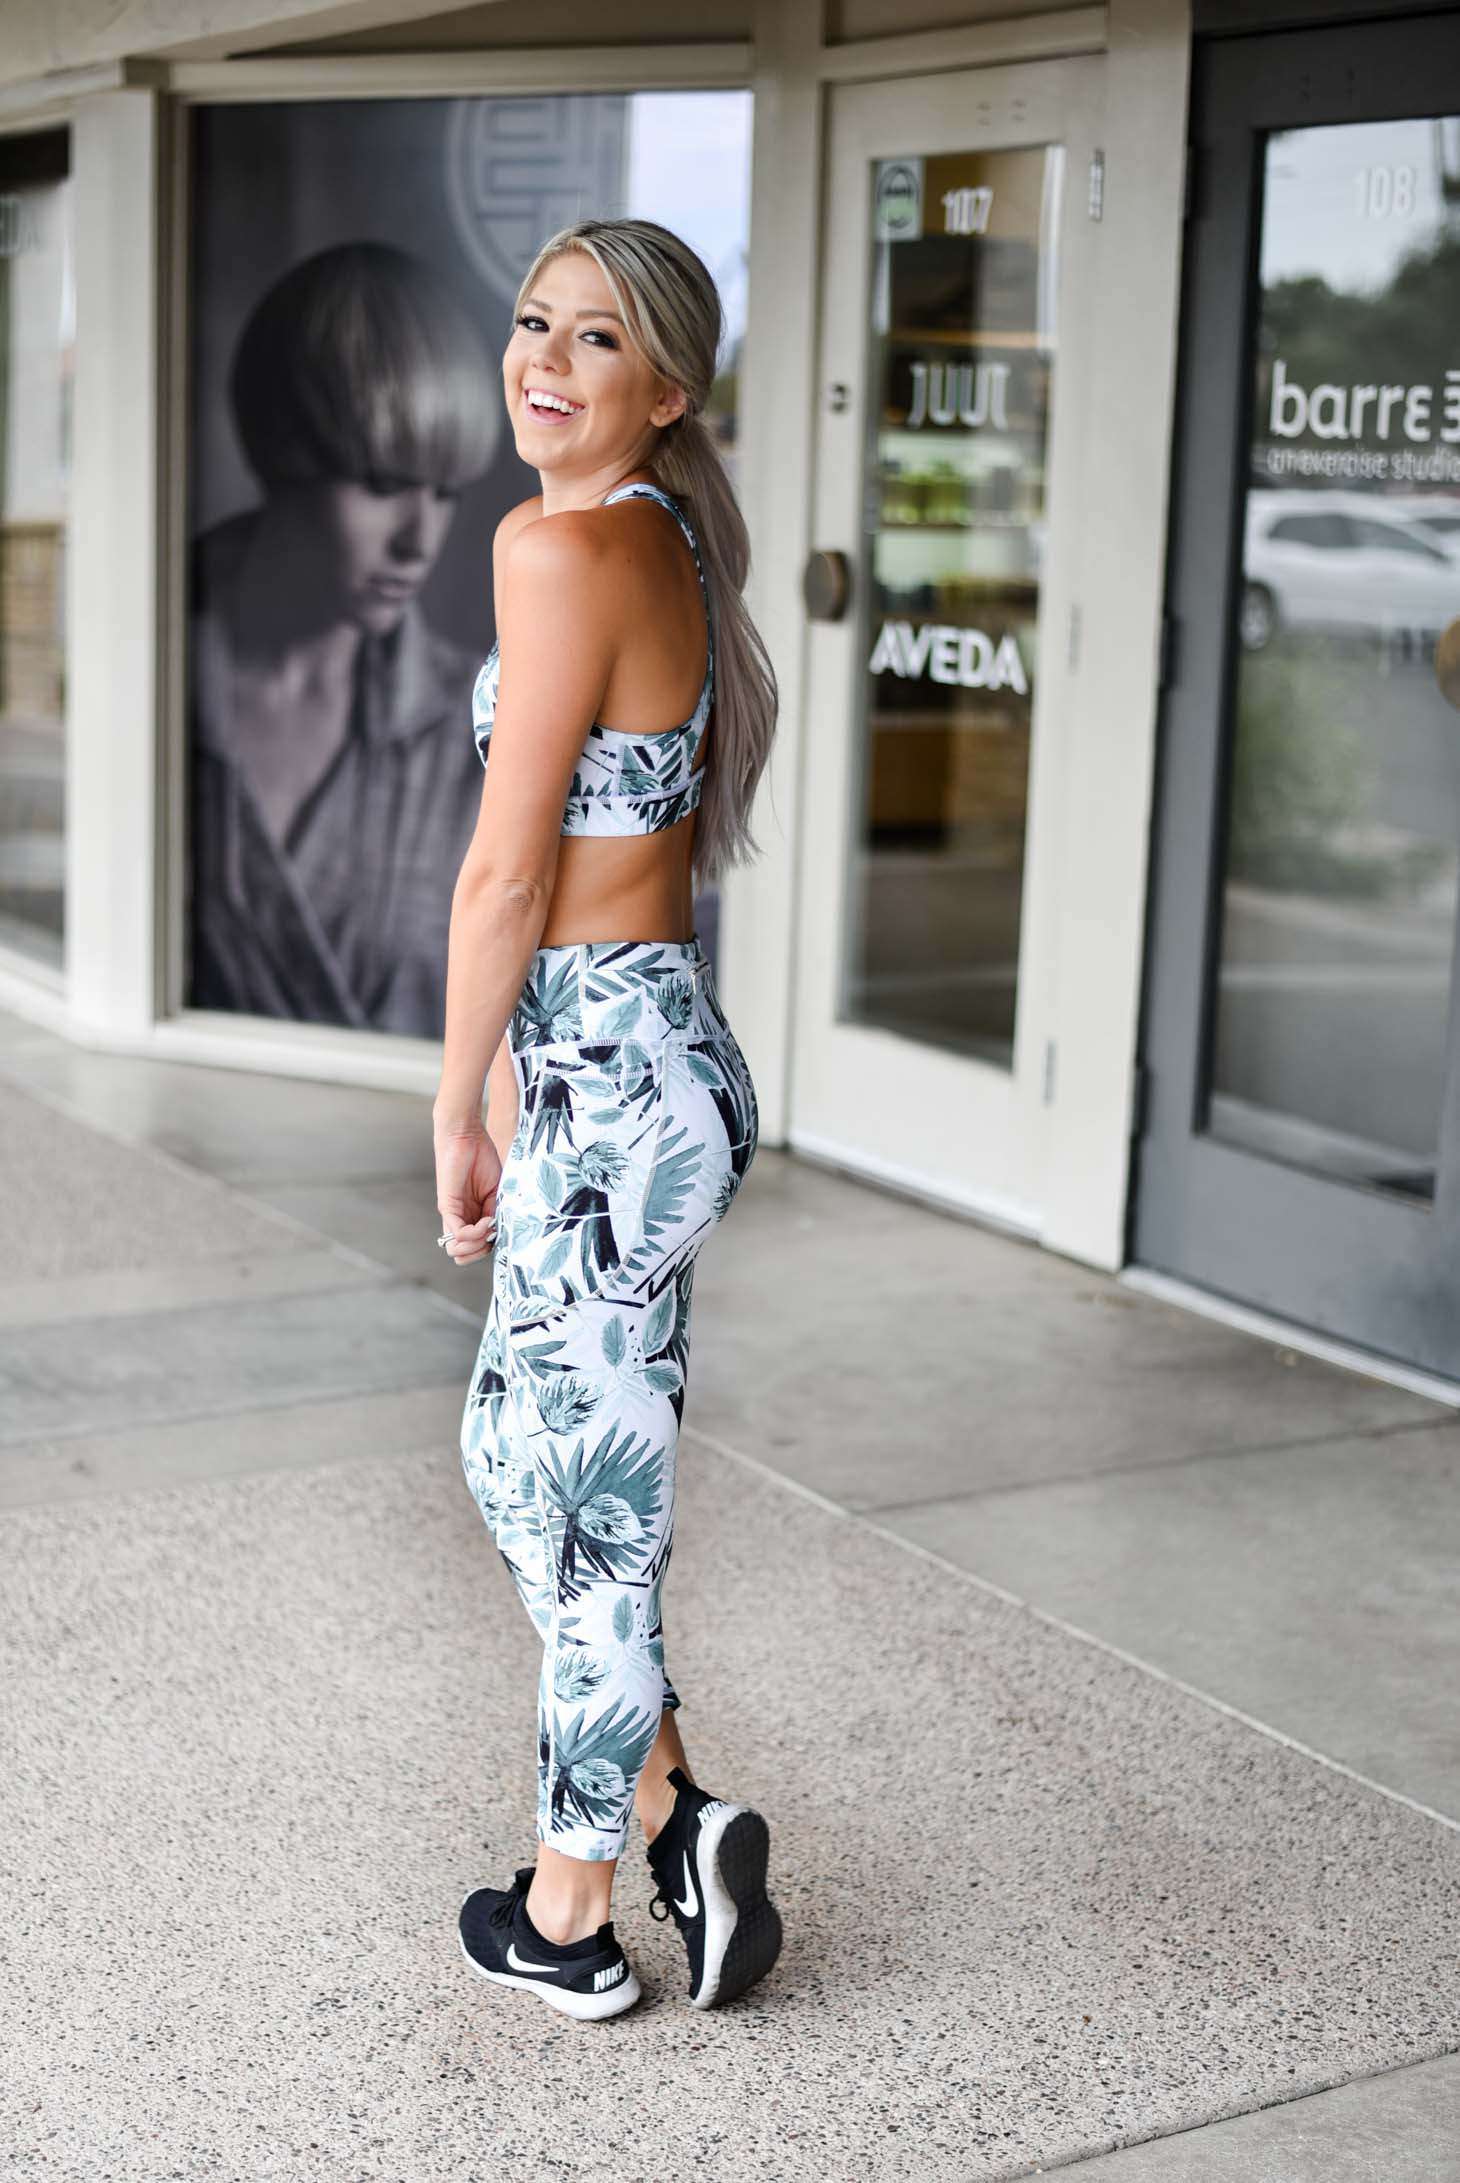 Erin Elizabeth of Wink and a Twirl shares her experience at Barre3 fitness studio in Scottsdale, Arizona wearing Senita Athletics sports bra and leggings 